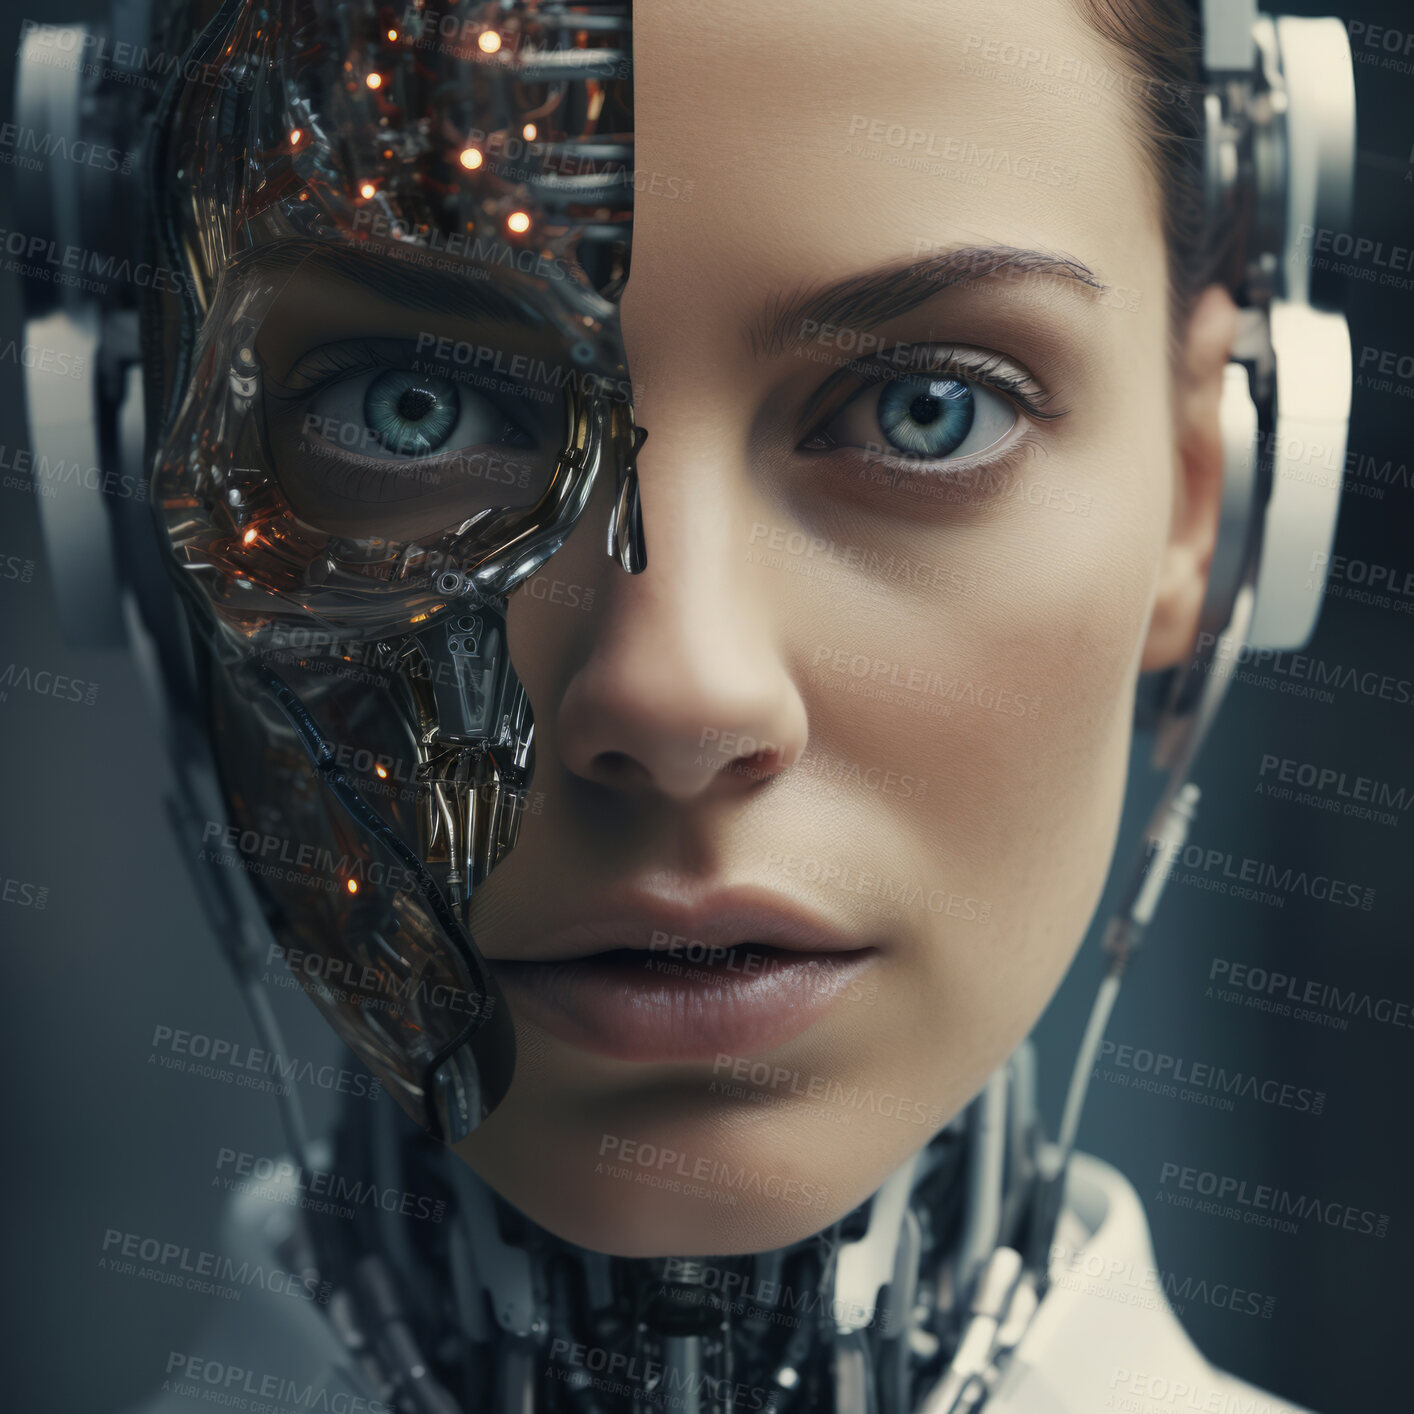 Buy stock photo Artificial intelligence futuristic humanoid cyber girl with a neural network. Cyborg alien woman